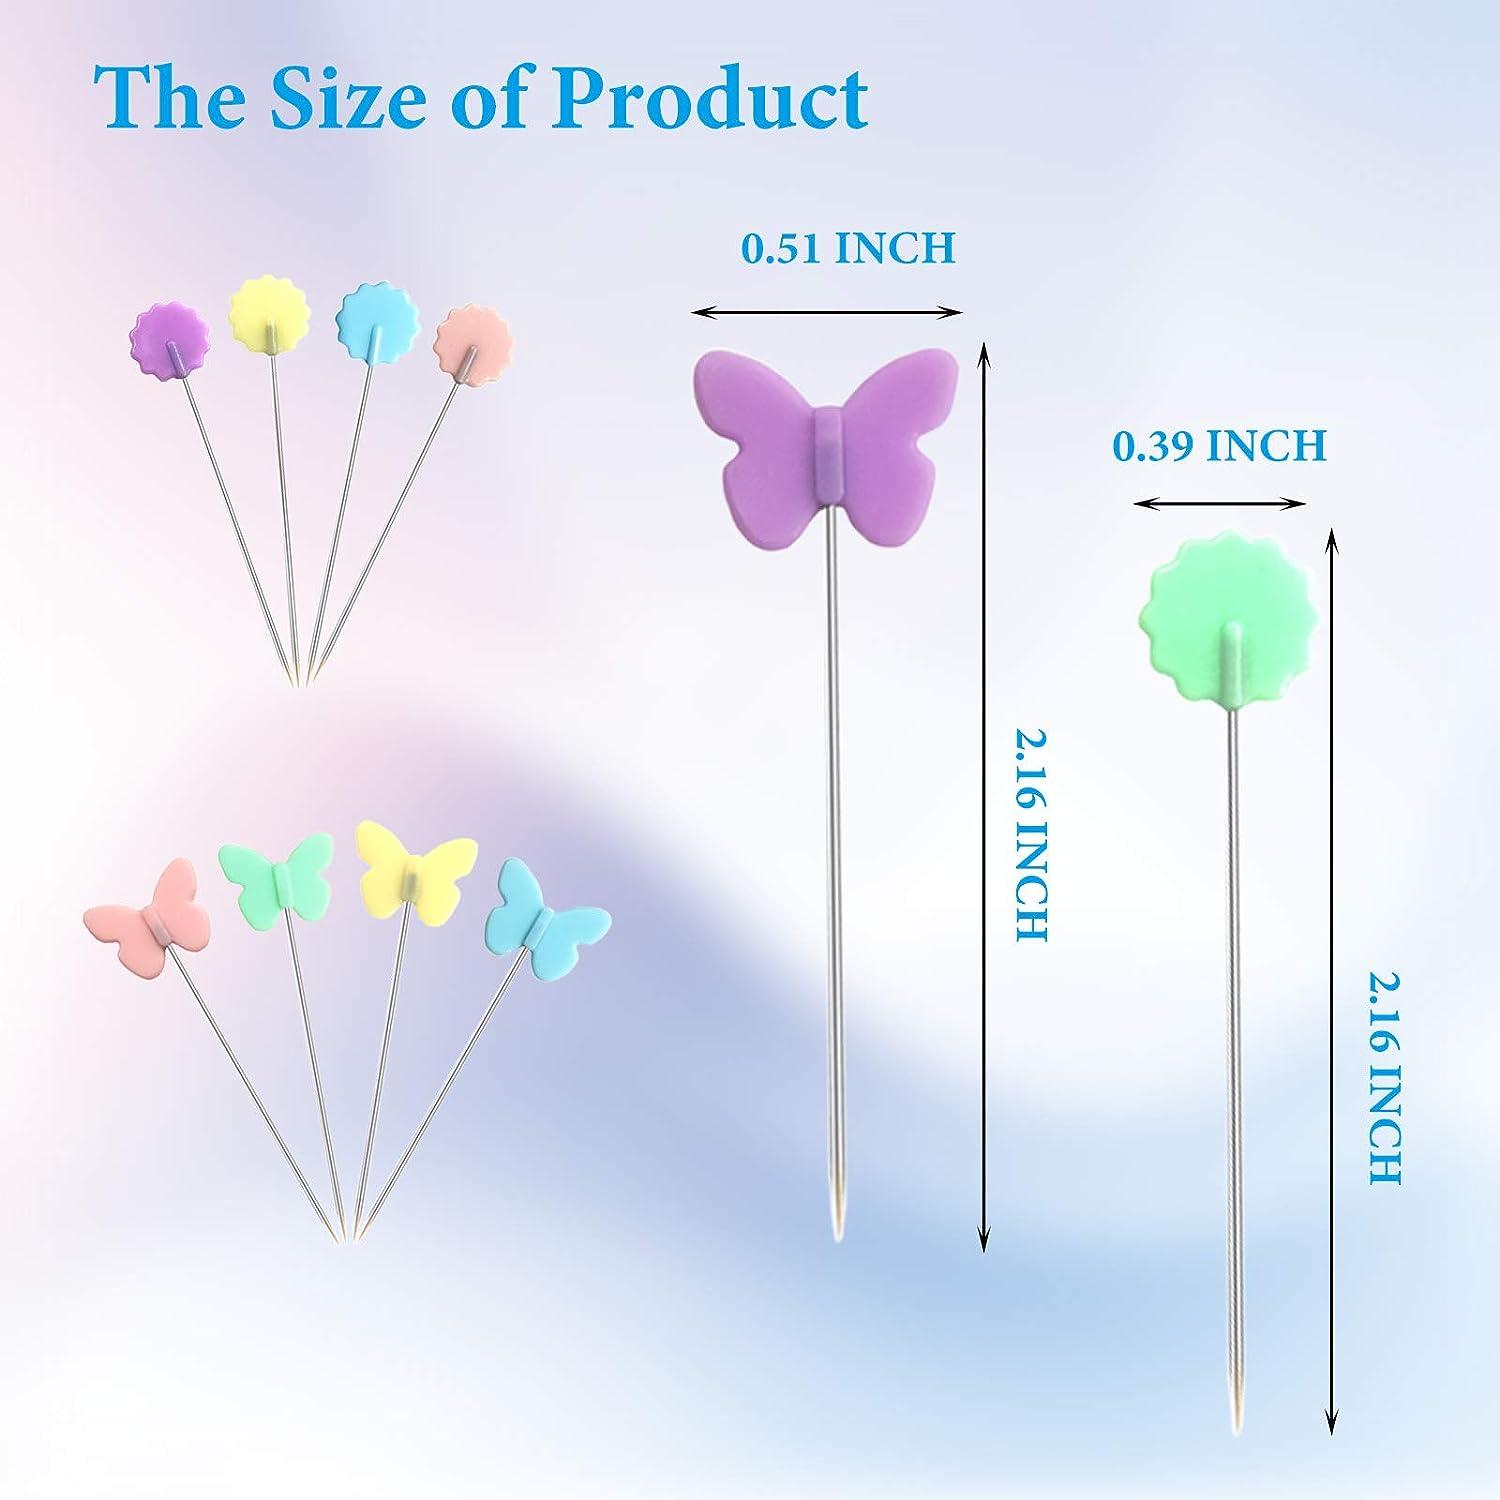 200pcs Sewing Pins Flat Head Straight Pins with Butterfly and